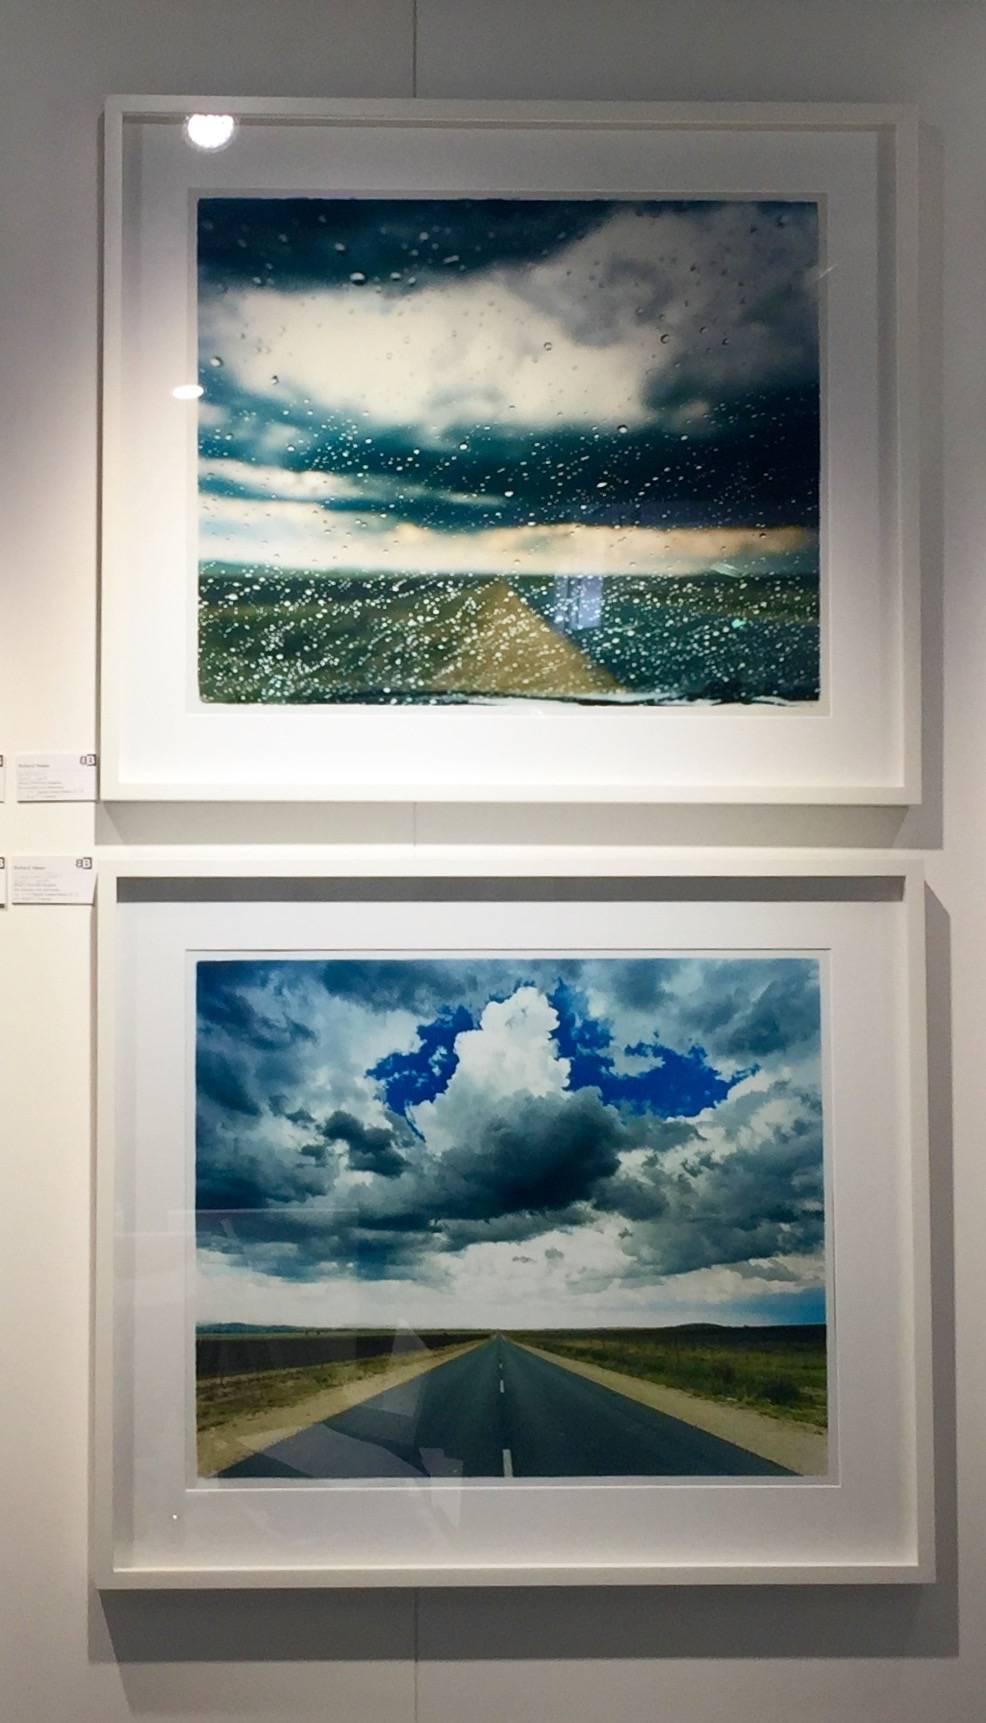 Schoeman's Drift, landscape photography by Richard Heeps taken in South Africa.
Richard Heeps' work takes you on a journey, the road is a reoccurring theme, often the location is ambiguous allowing you to see your own road trip. The moody sky over